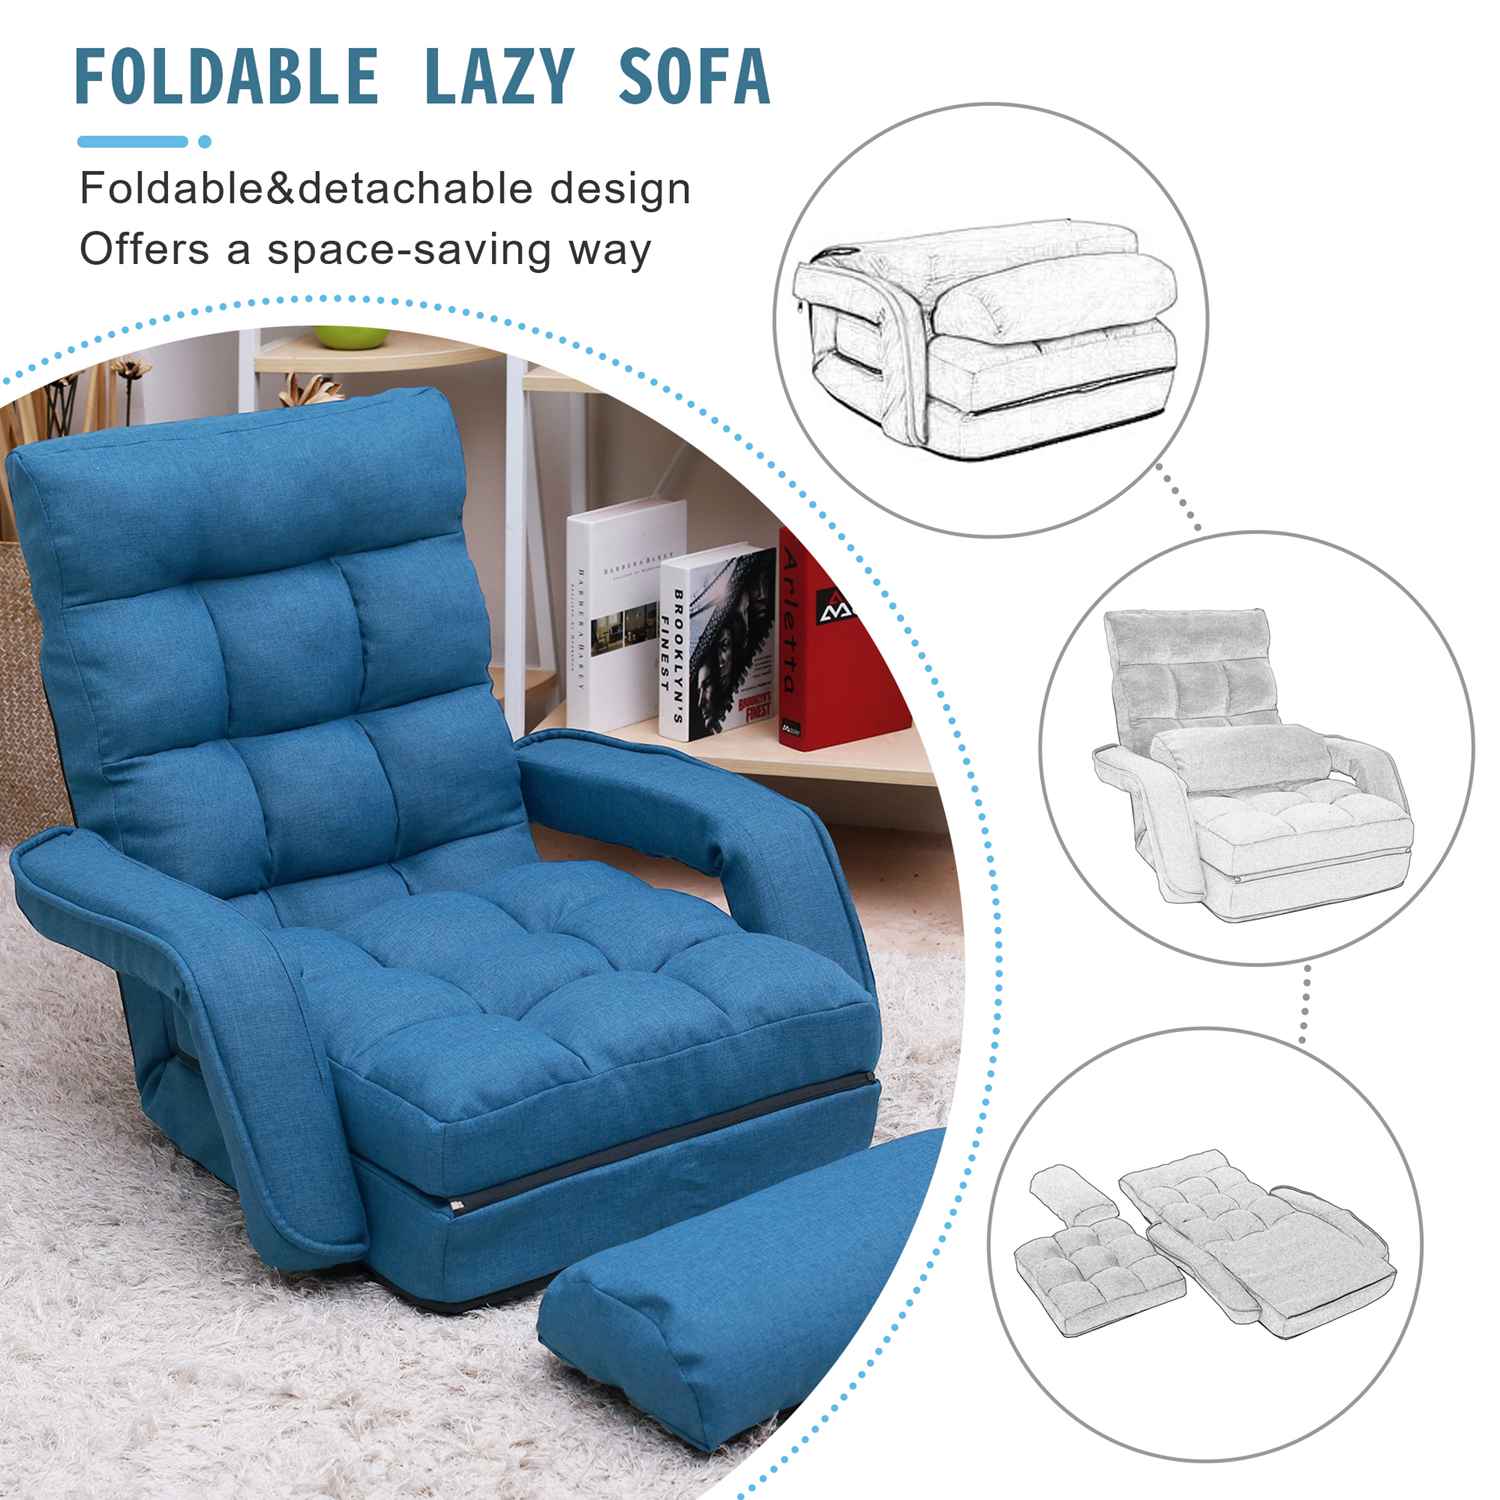 Lazy Sofa Floor Chair 5 Position Adjustable Lazy Floor Sofa Chair For Bedroom And Living Room (3)